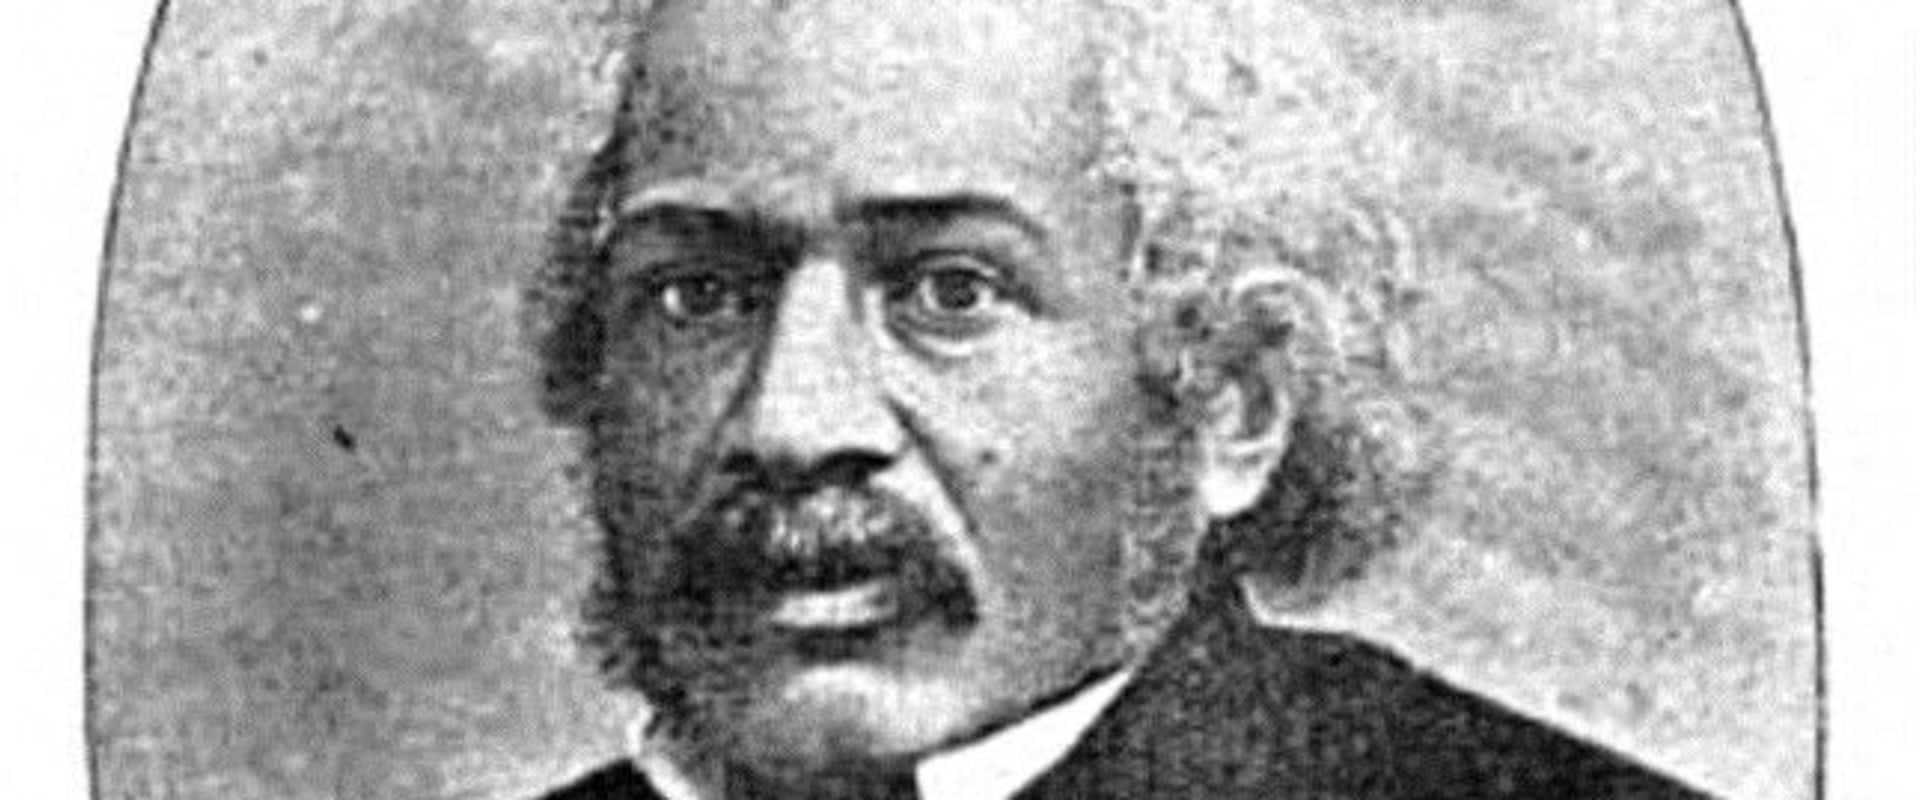 Who was the first african medical doctor?